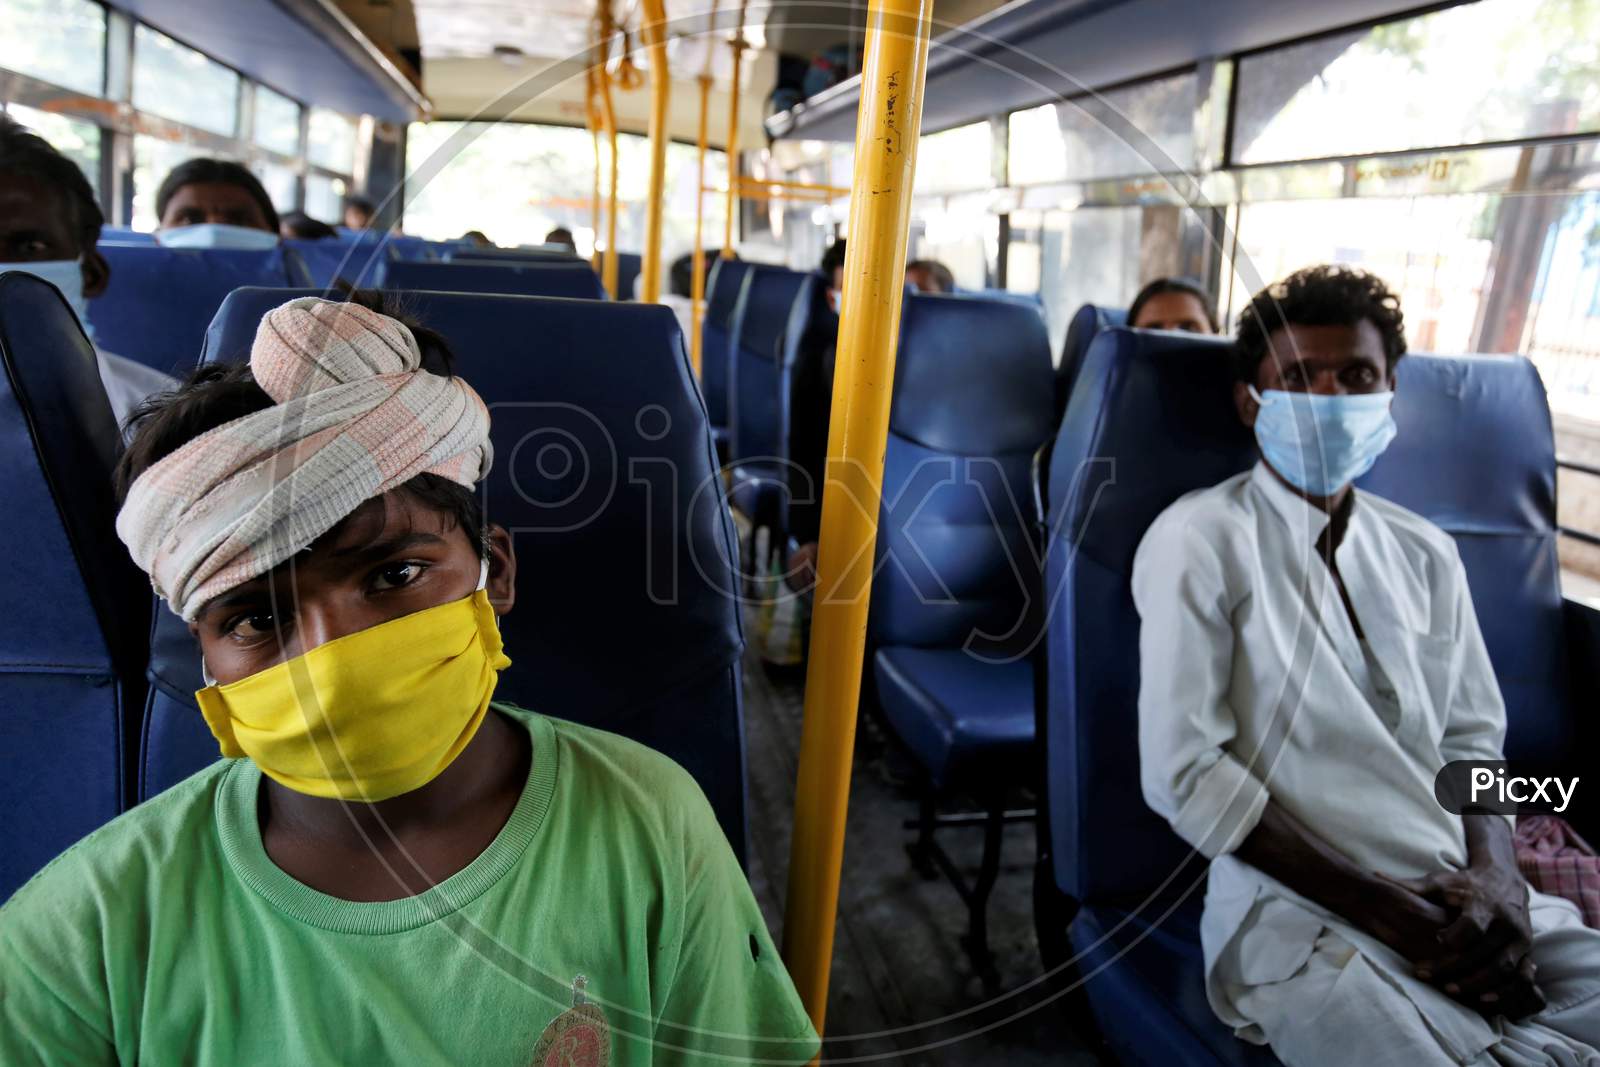 A young boy occupies a seat in a bus prior to being repatriated to his village by the government during a nationwide lockdown to prevent the spread of coronavirus (COVID-19) in Bangalore, India, April 30, 2020.